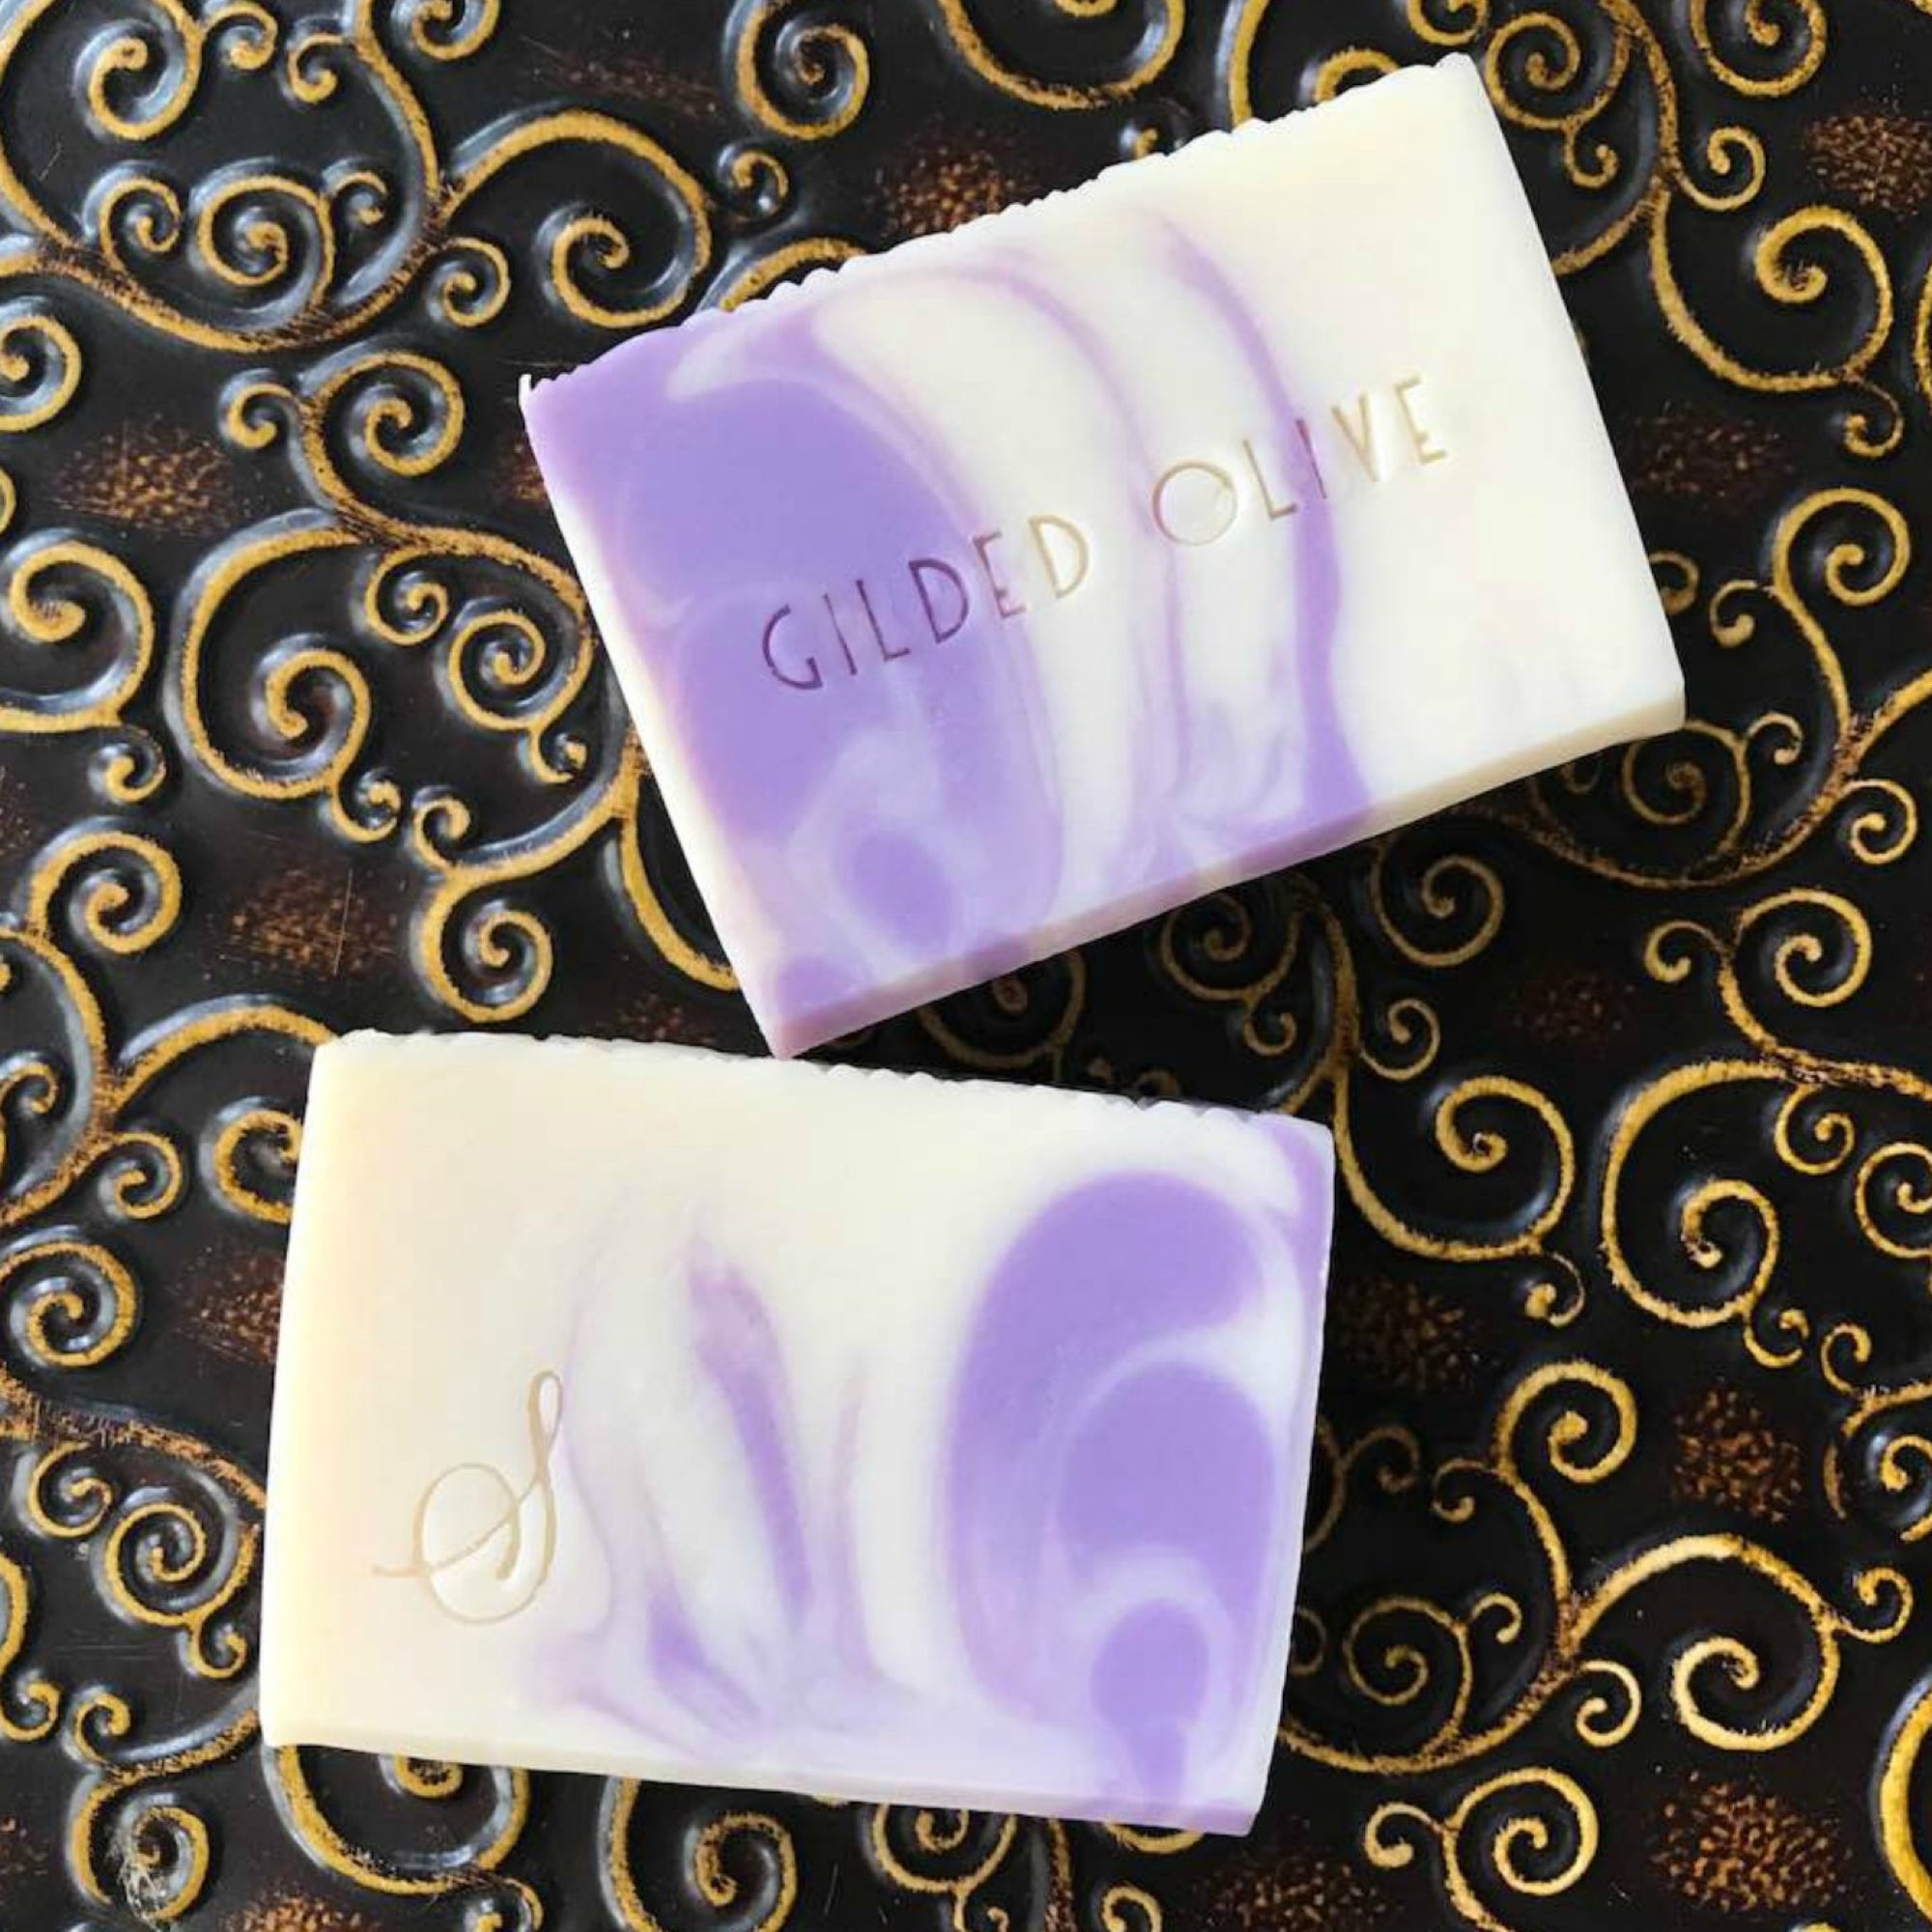 Sophie Lavender Handmade Soap | Gilded Olive Apothecary